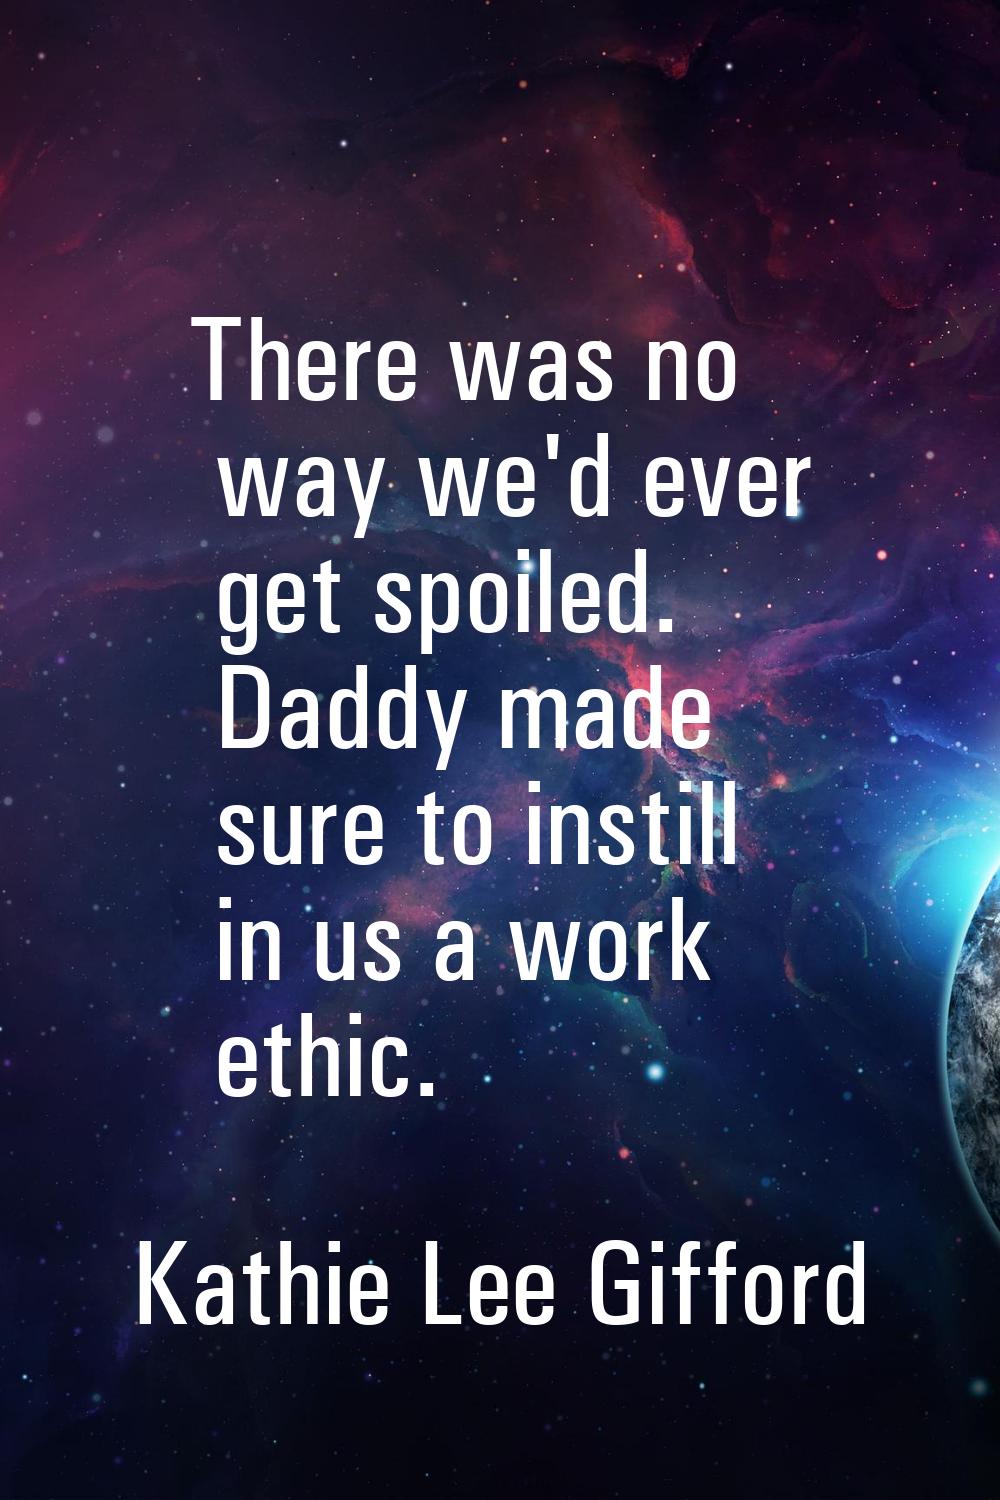 There was no way we'd ever get spoiled. Daddy made sure to instill in us a work ethic.